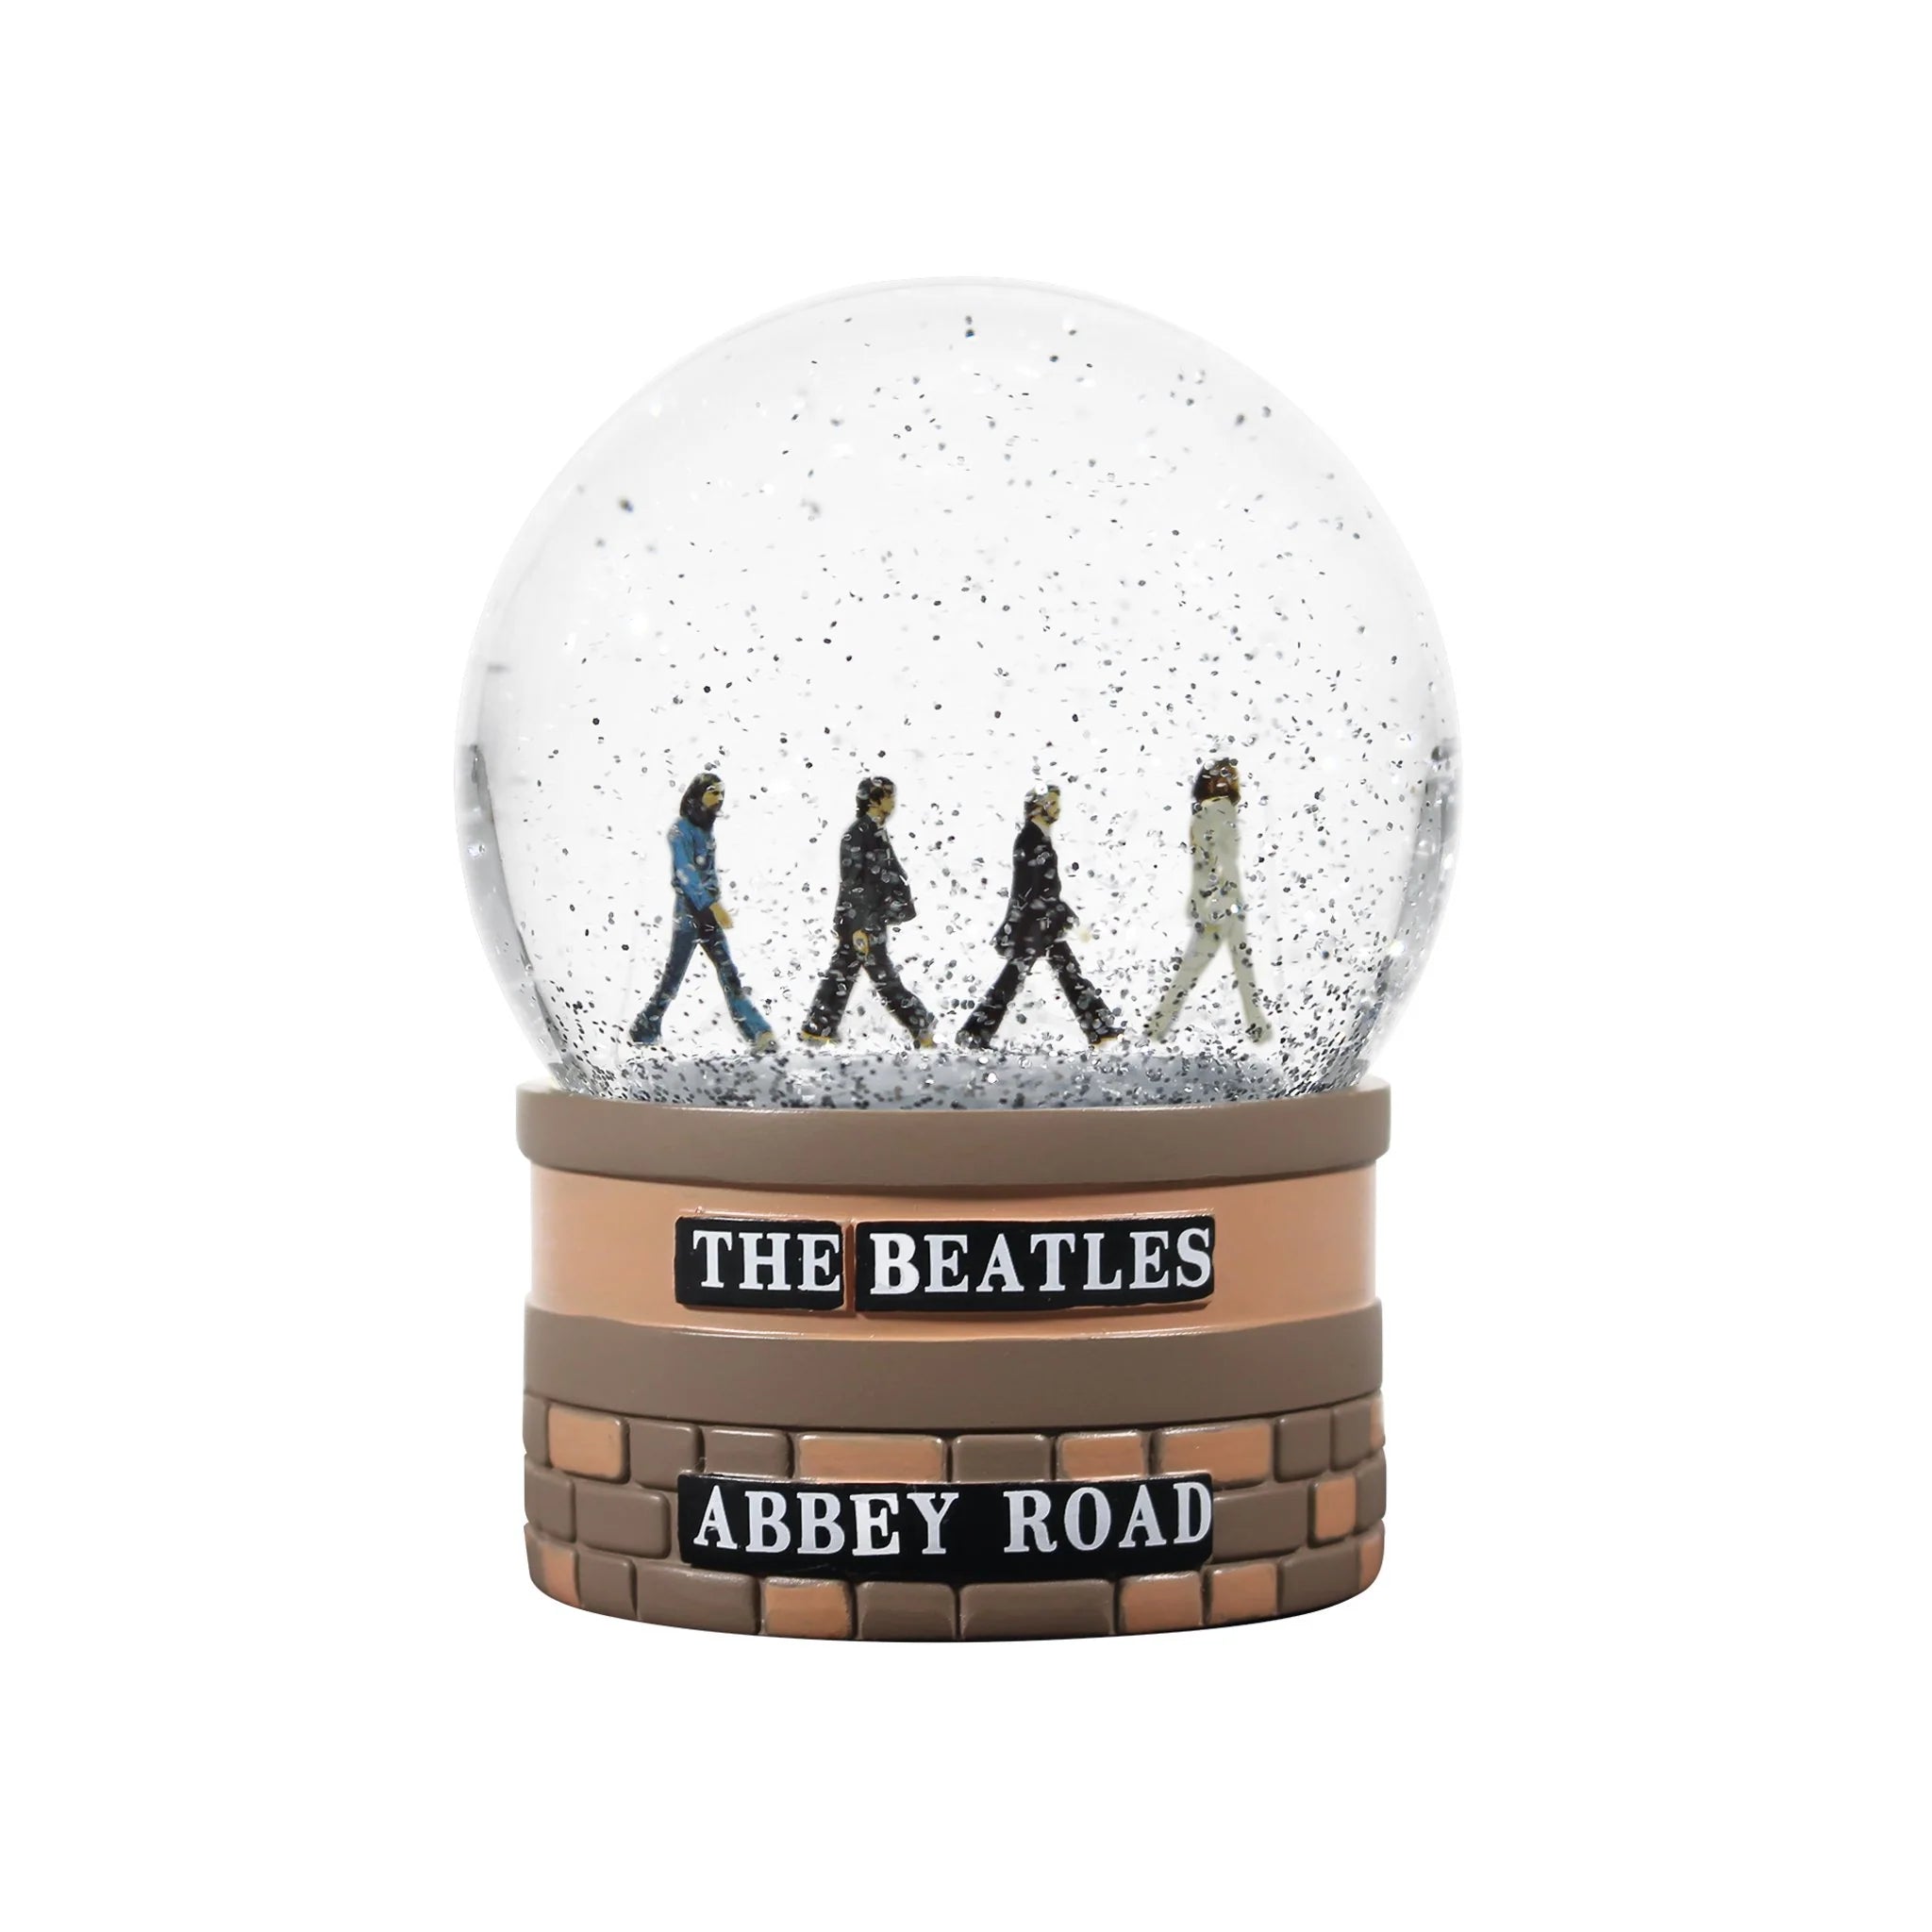 The Beatles - Abbey Road Snow Globe Boxed